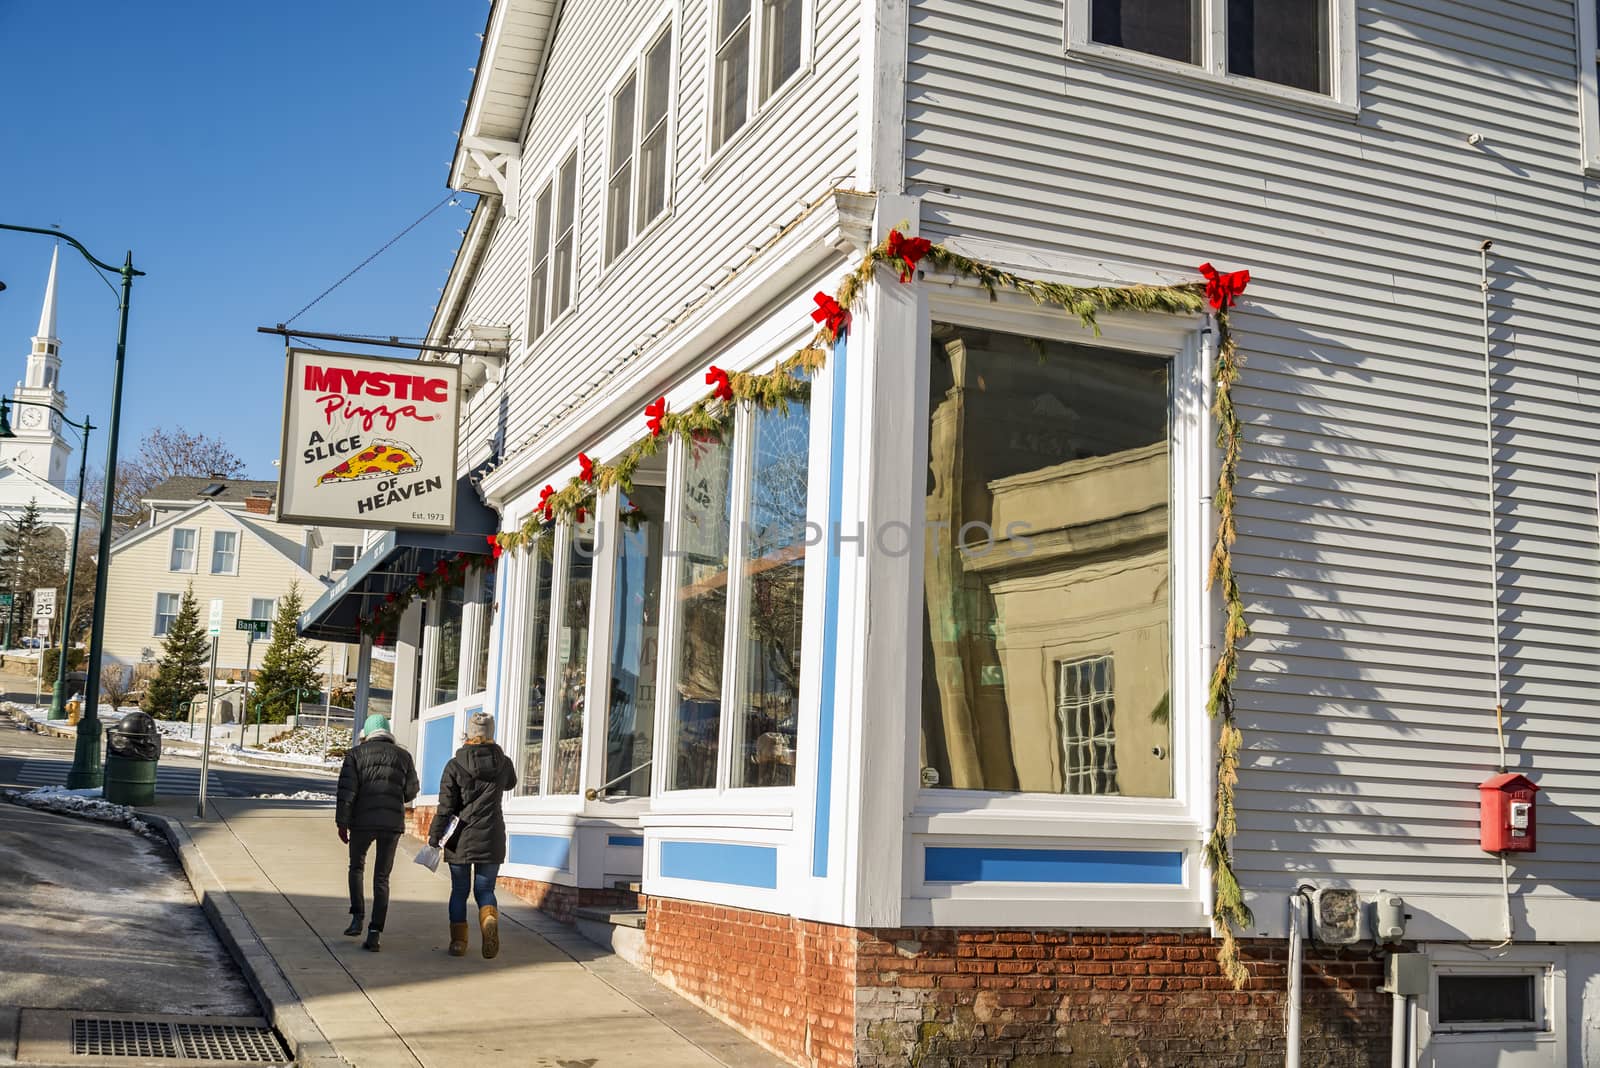 Mystic Pizza in Connecticut, located on the Mystic town by edella